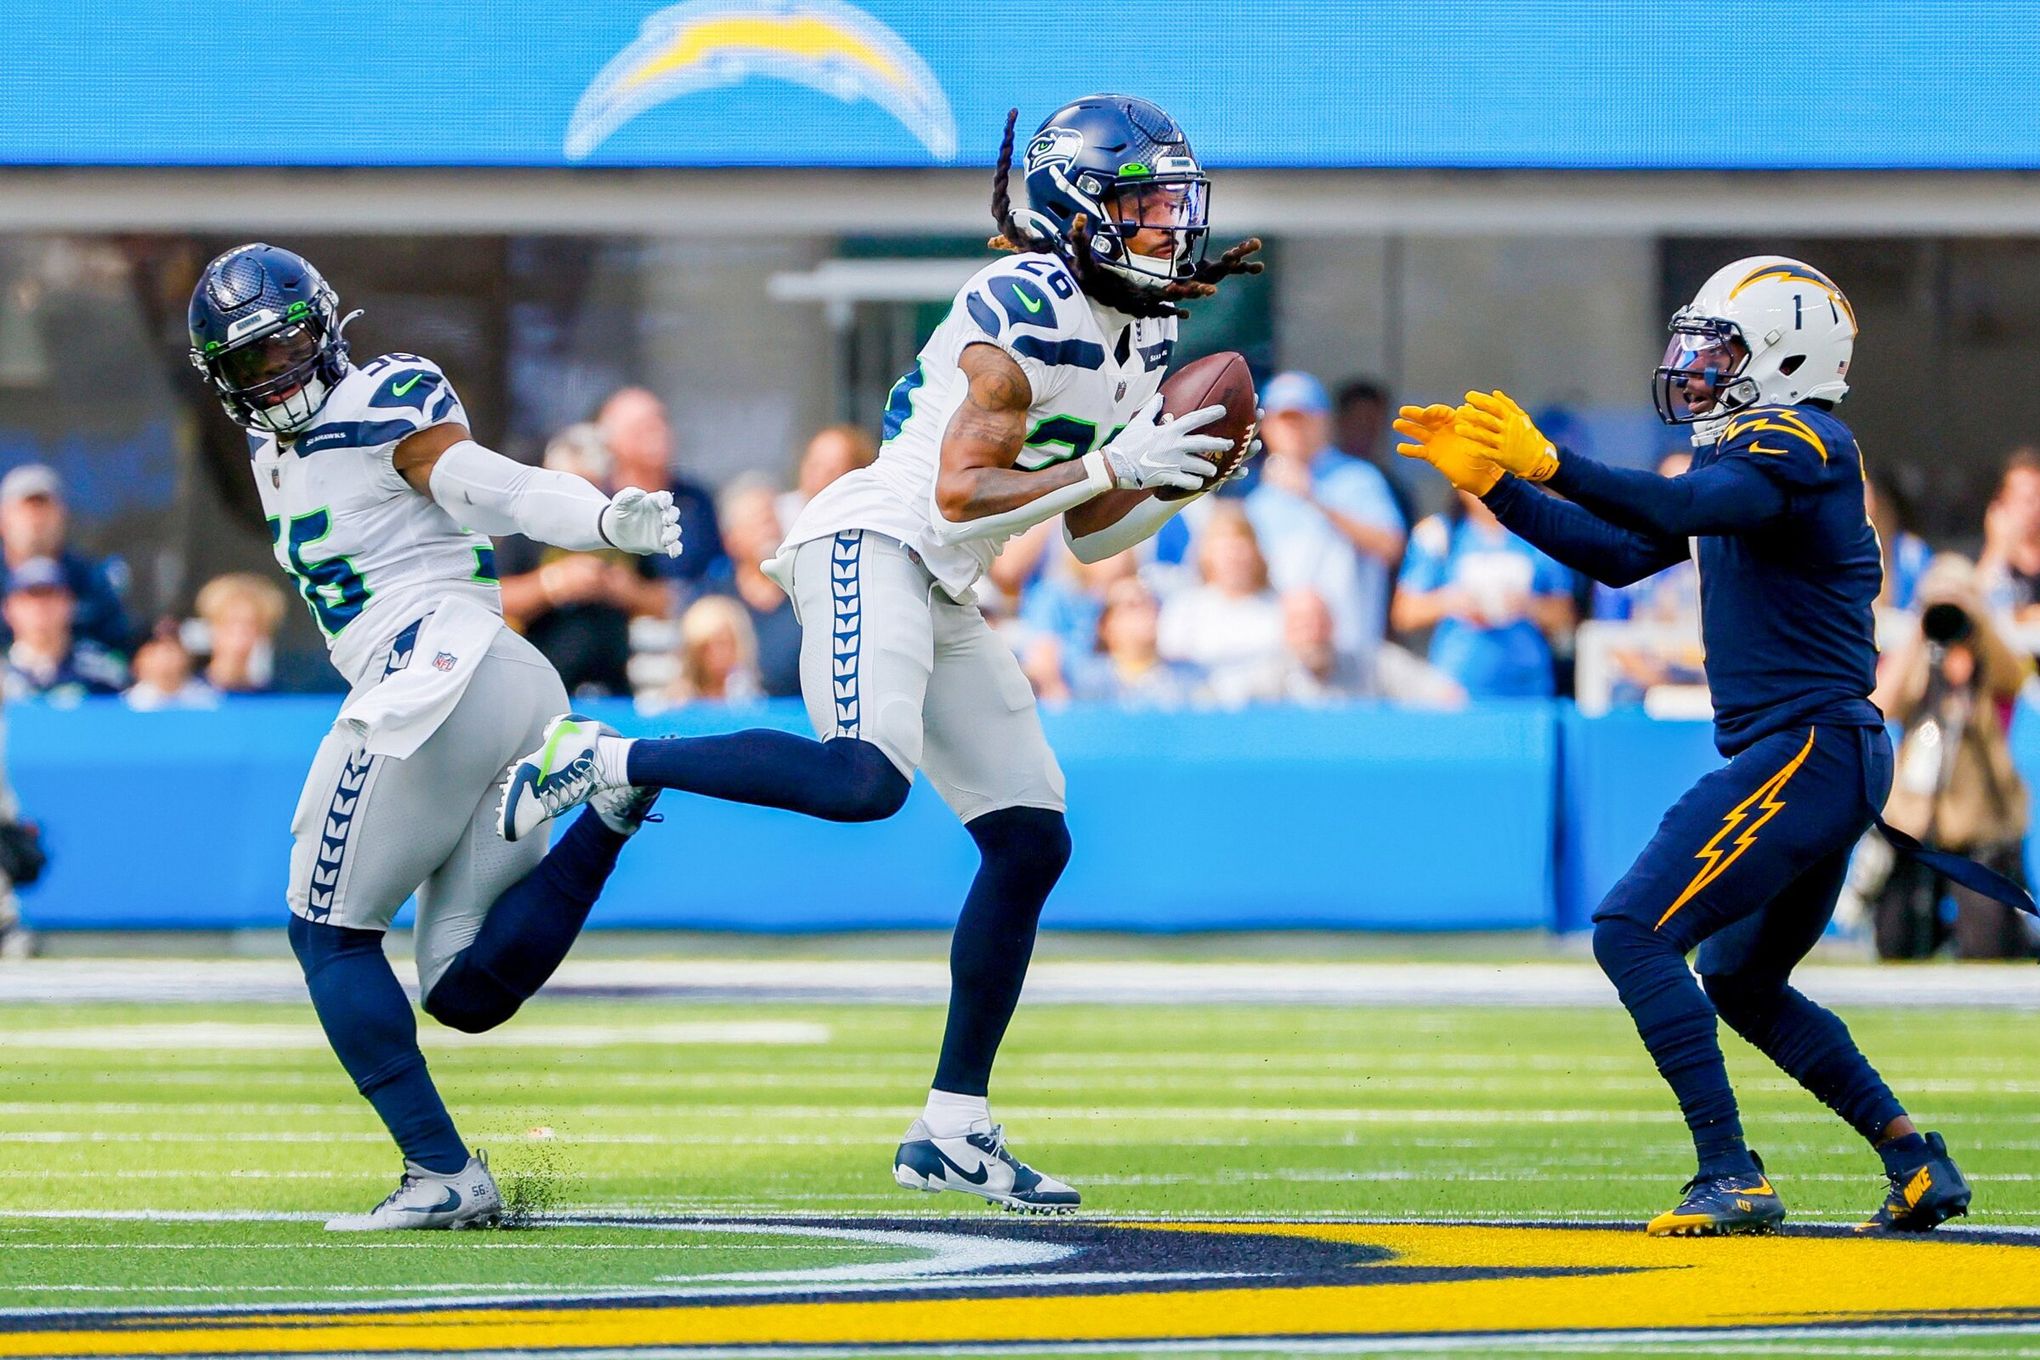 Reporter Bob Condotta grades the Seahawks' Week 7 win over Chargers